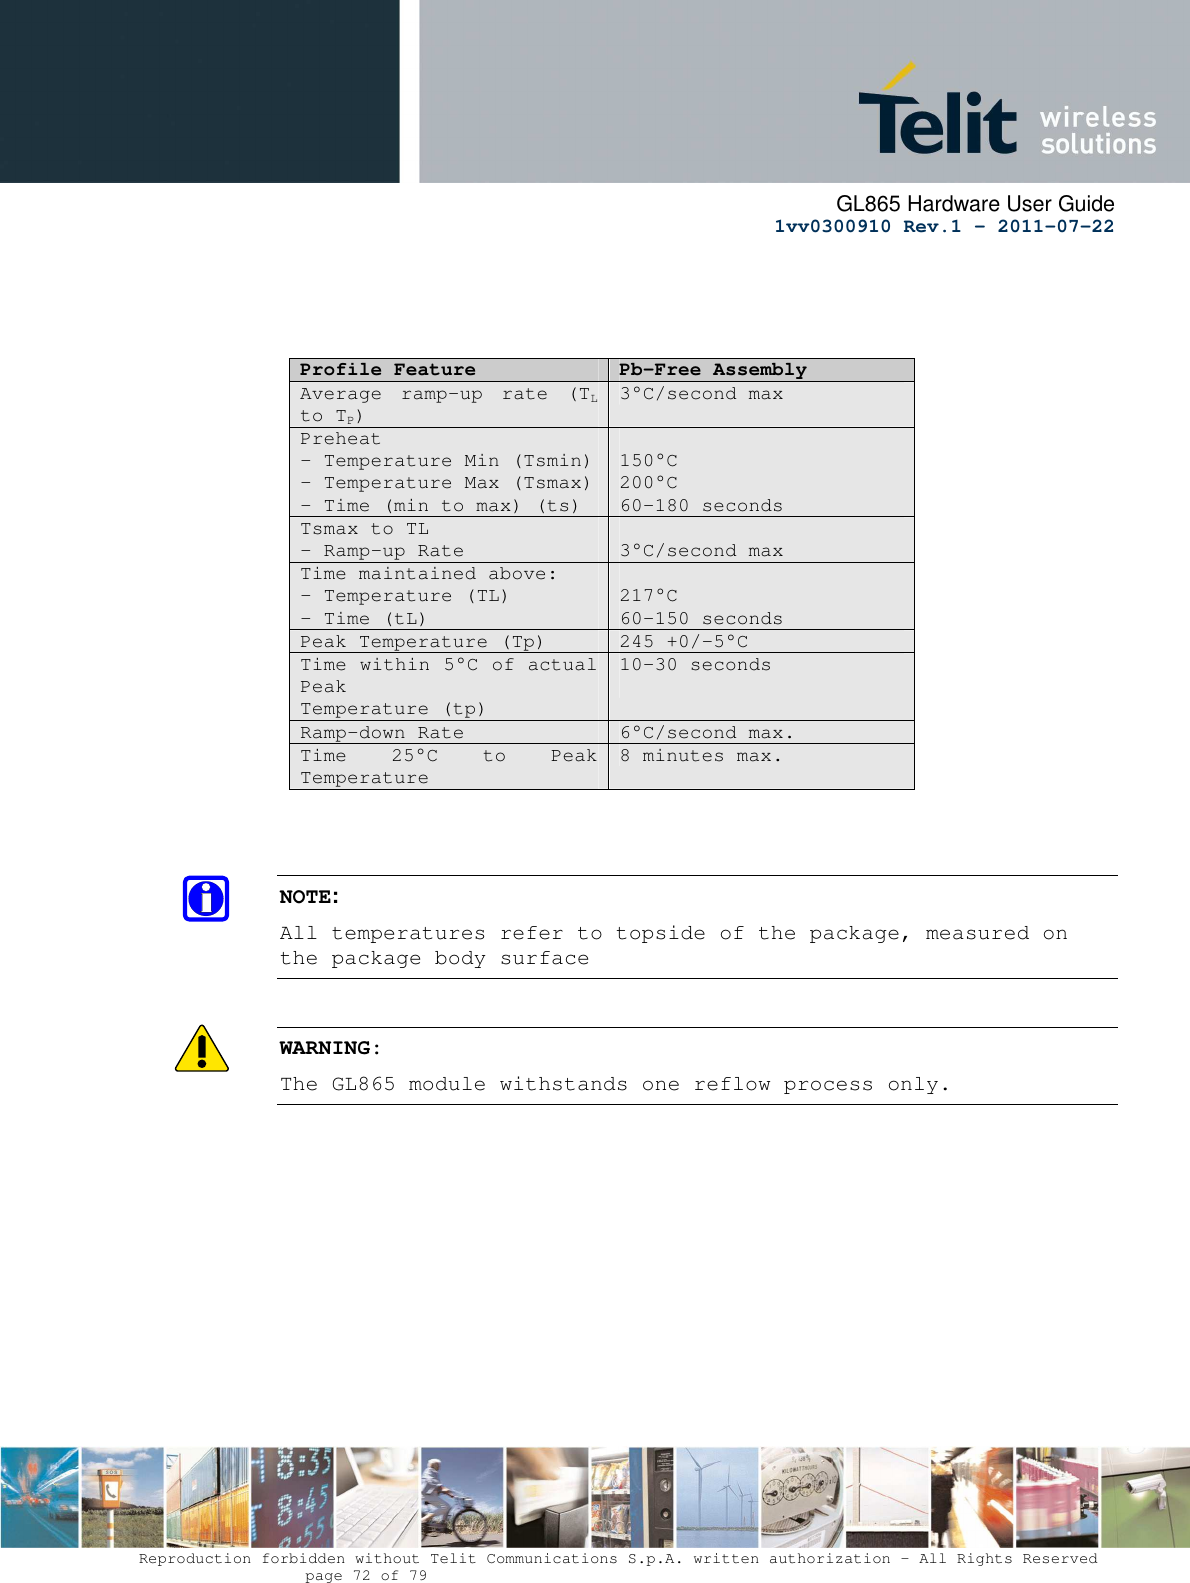      GL865 Hardware User Guide     1vv0300910 Rev.1 – 2011-07-22       Reproduction forbidden without Telit Communications S.p.A. written authorization - All Rights Reserved    page 72 of 79      Profile Feature  Pb-Free Assembly Average  ramp-up  rate  (TL to TP) 3°C/second max Preheat – Temperature Min (Tsmin) – Temperature Max (Tsmax) – Time (min to max) (ts)  150°C 200°C 60-180 seconds Tsmax to TL – Ramp-up Rate  3°C/second max Time maintained above: – Temperature (TL) – Time (tL)  217°C 60-150 seconds Peak Temperature (Tp) 245 +0/-5°C Time within 5°C of actual Peak Temperature (tp) 10-30 seconds  Ramp-down Rate 6°C/second max. Time  25°C  to  Peak Temperature 8 minutes max.    NOTE: All temperatures refer to topside of the package, measured on the package body surface    WARNING: The GL865 module withstands one reflow process only.            